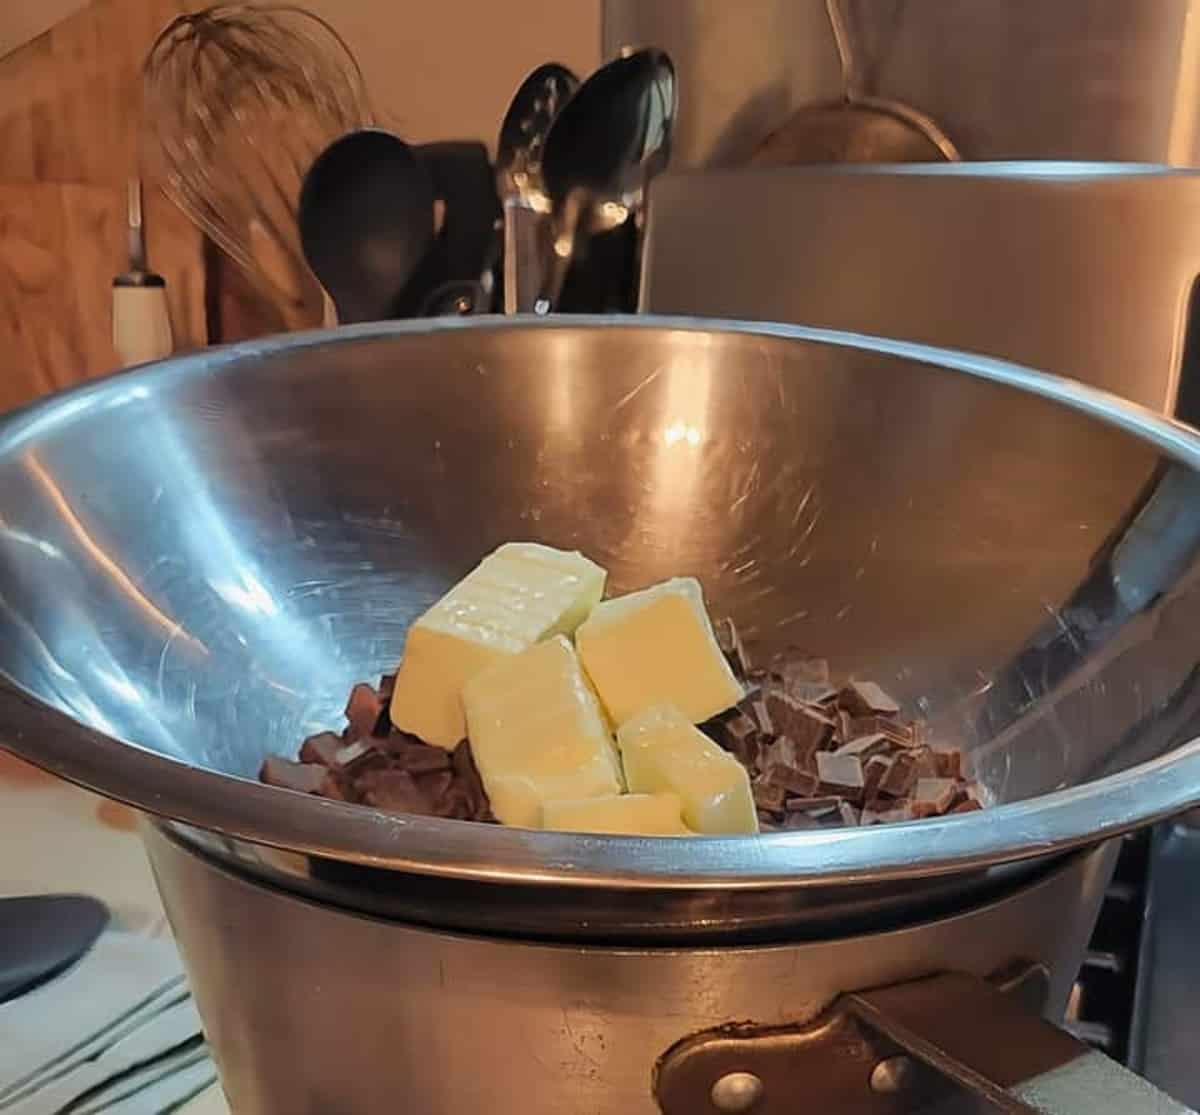 chopped chocolate and butter chunks shown in metal mixing bowl over sauce pan forming a double boiler
flourless chocolate torte